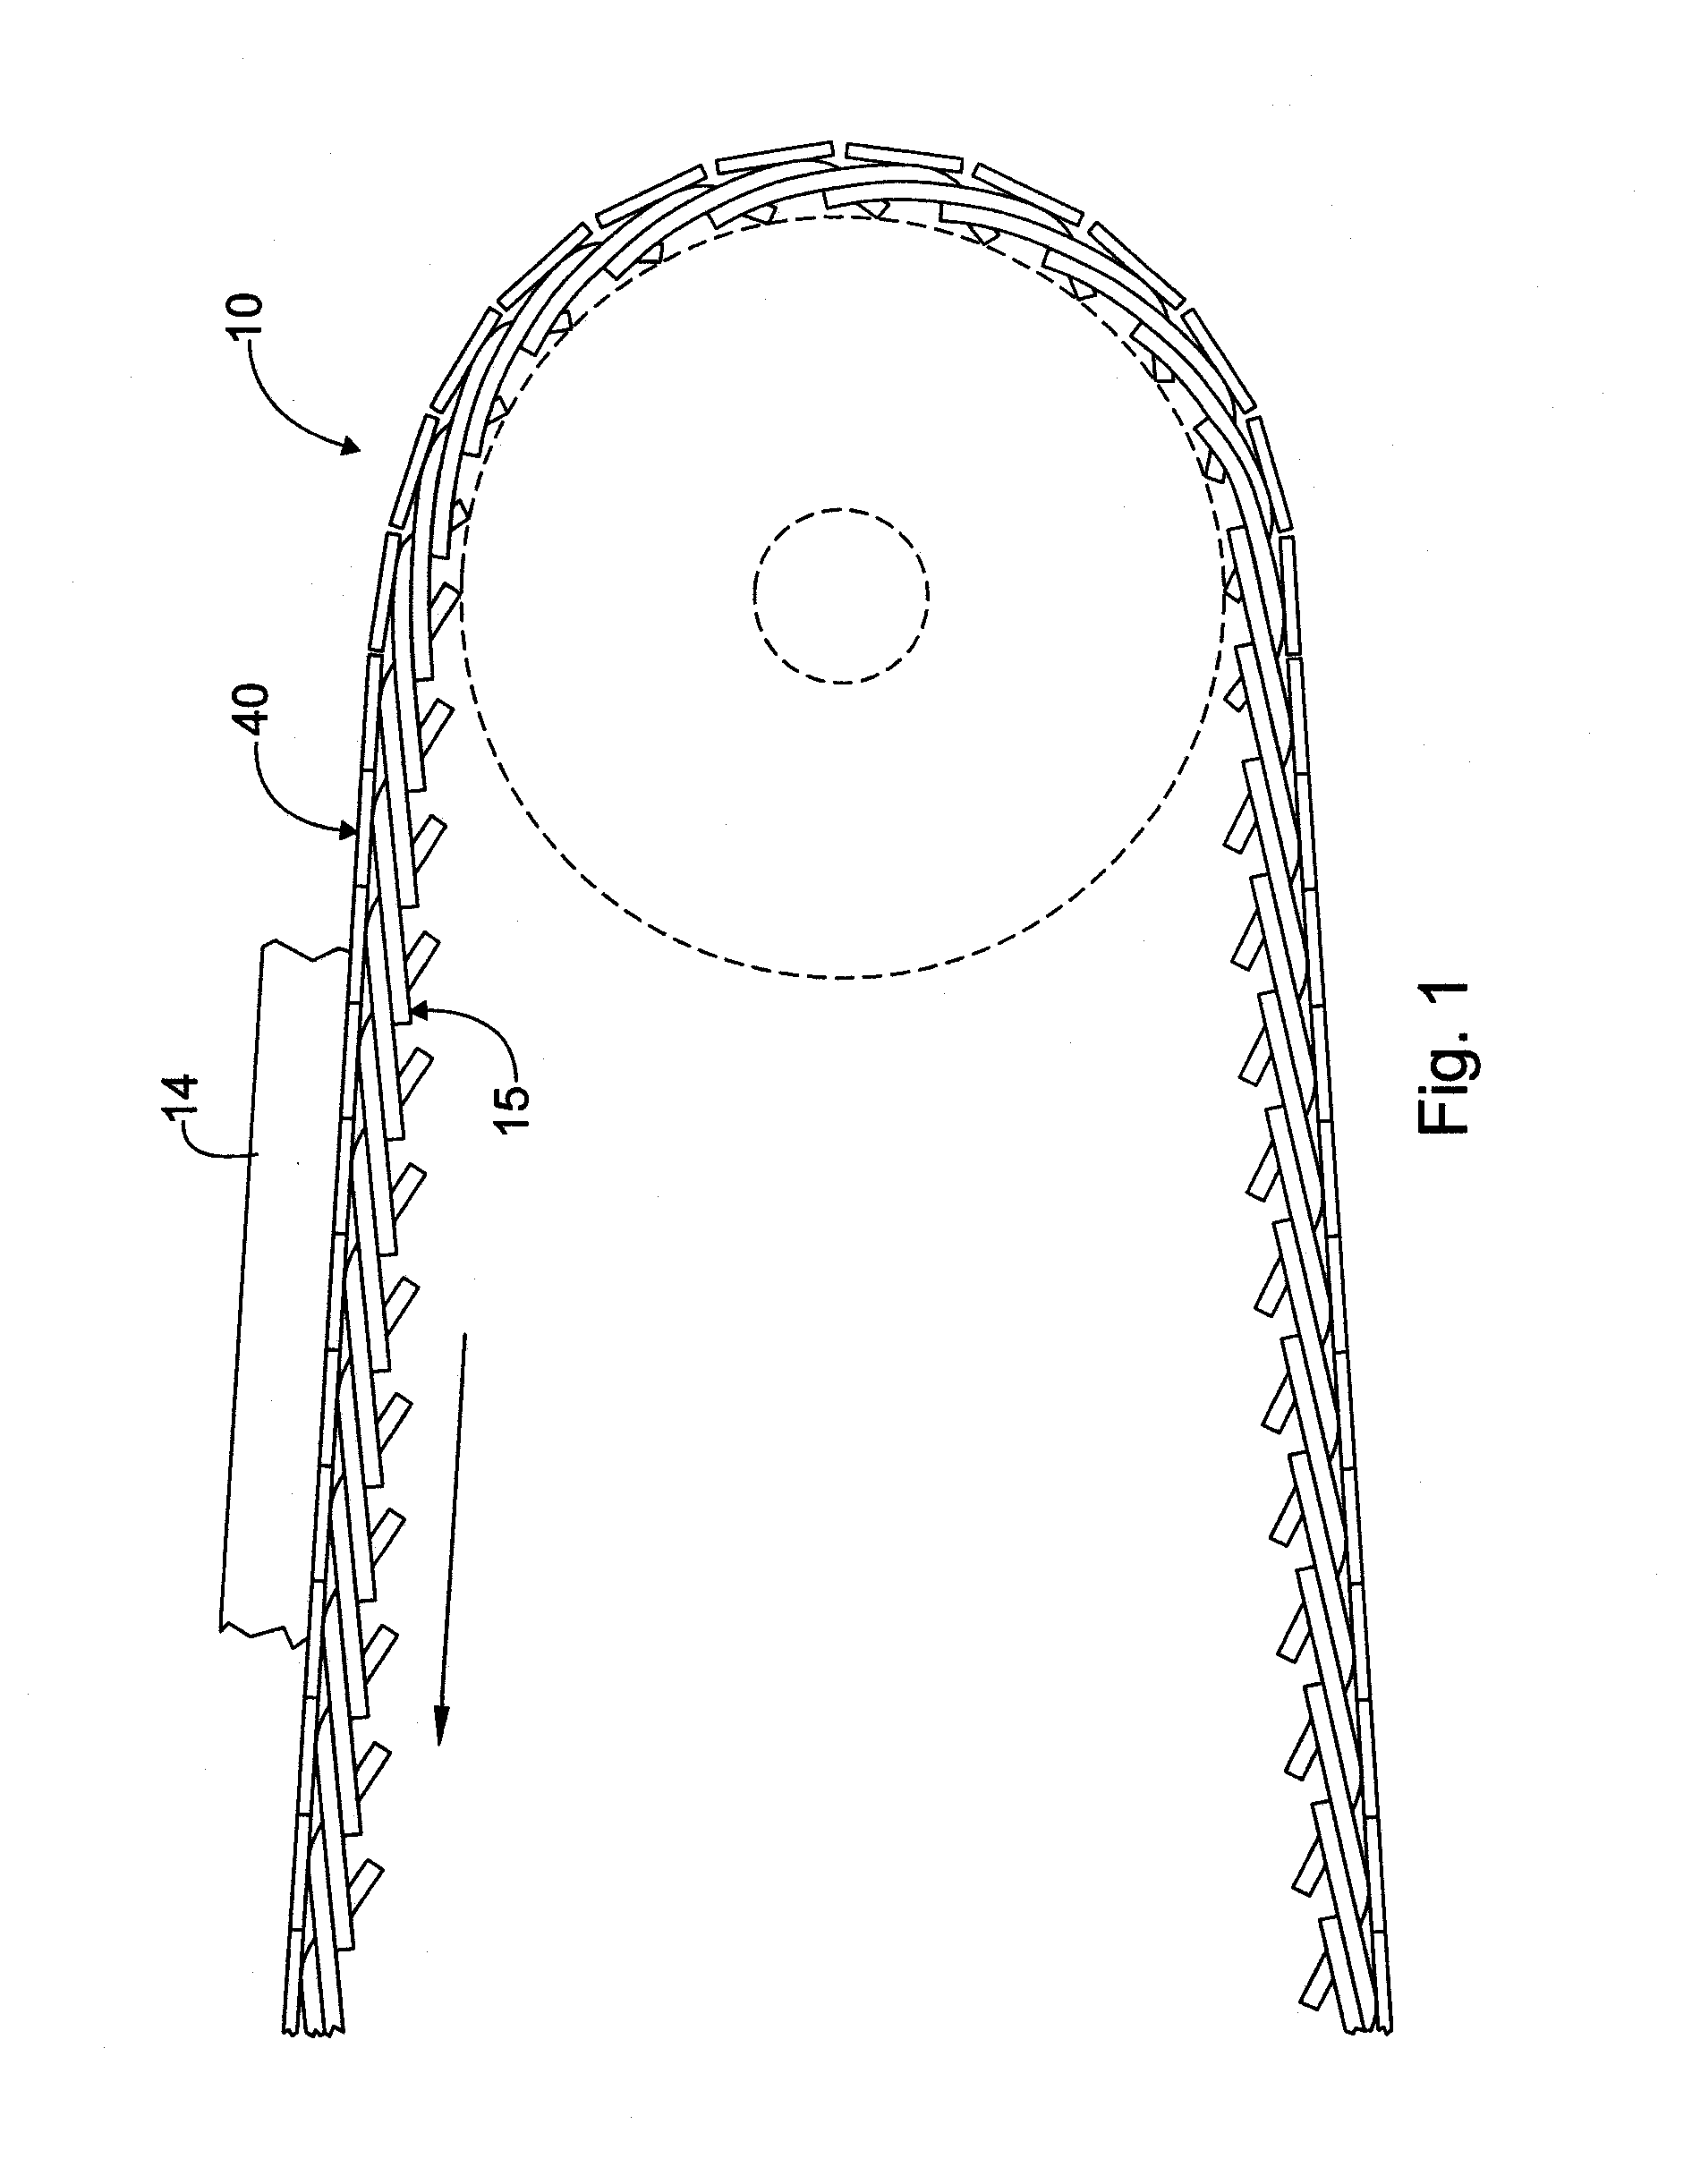 Link belt assembly and method for producing same